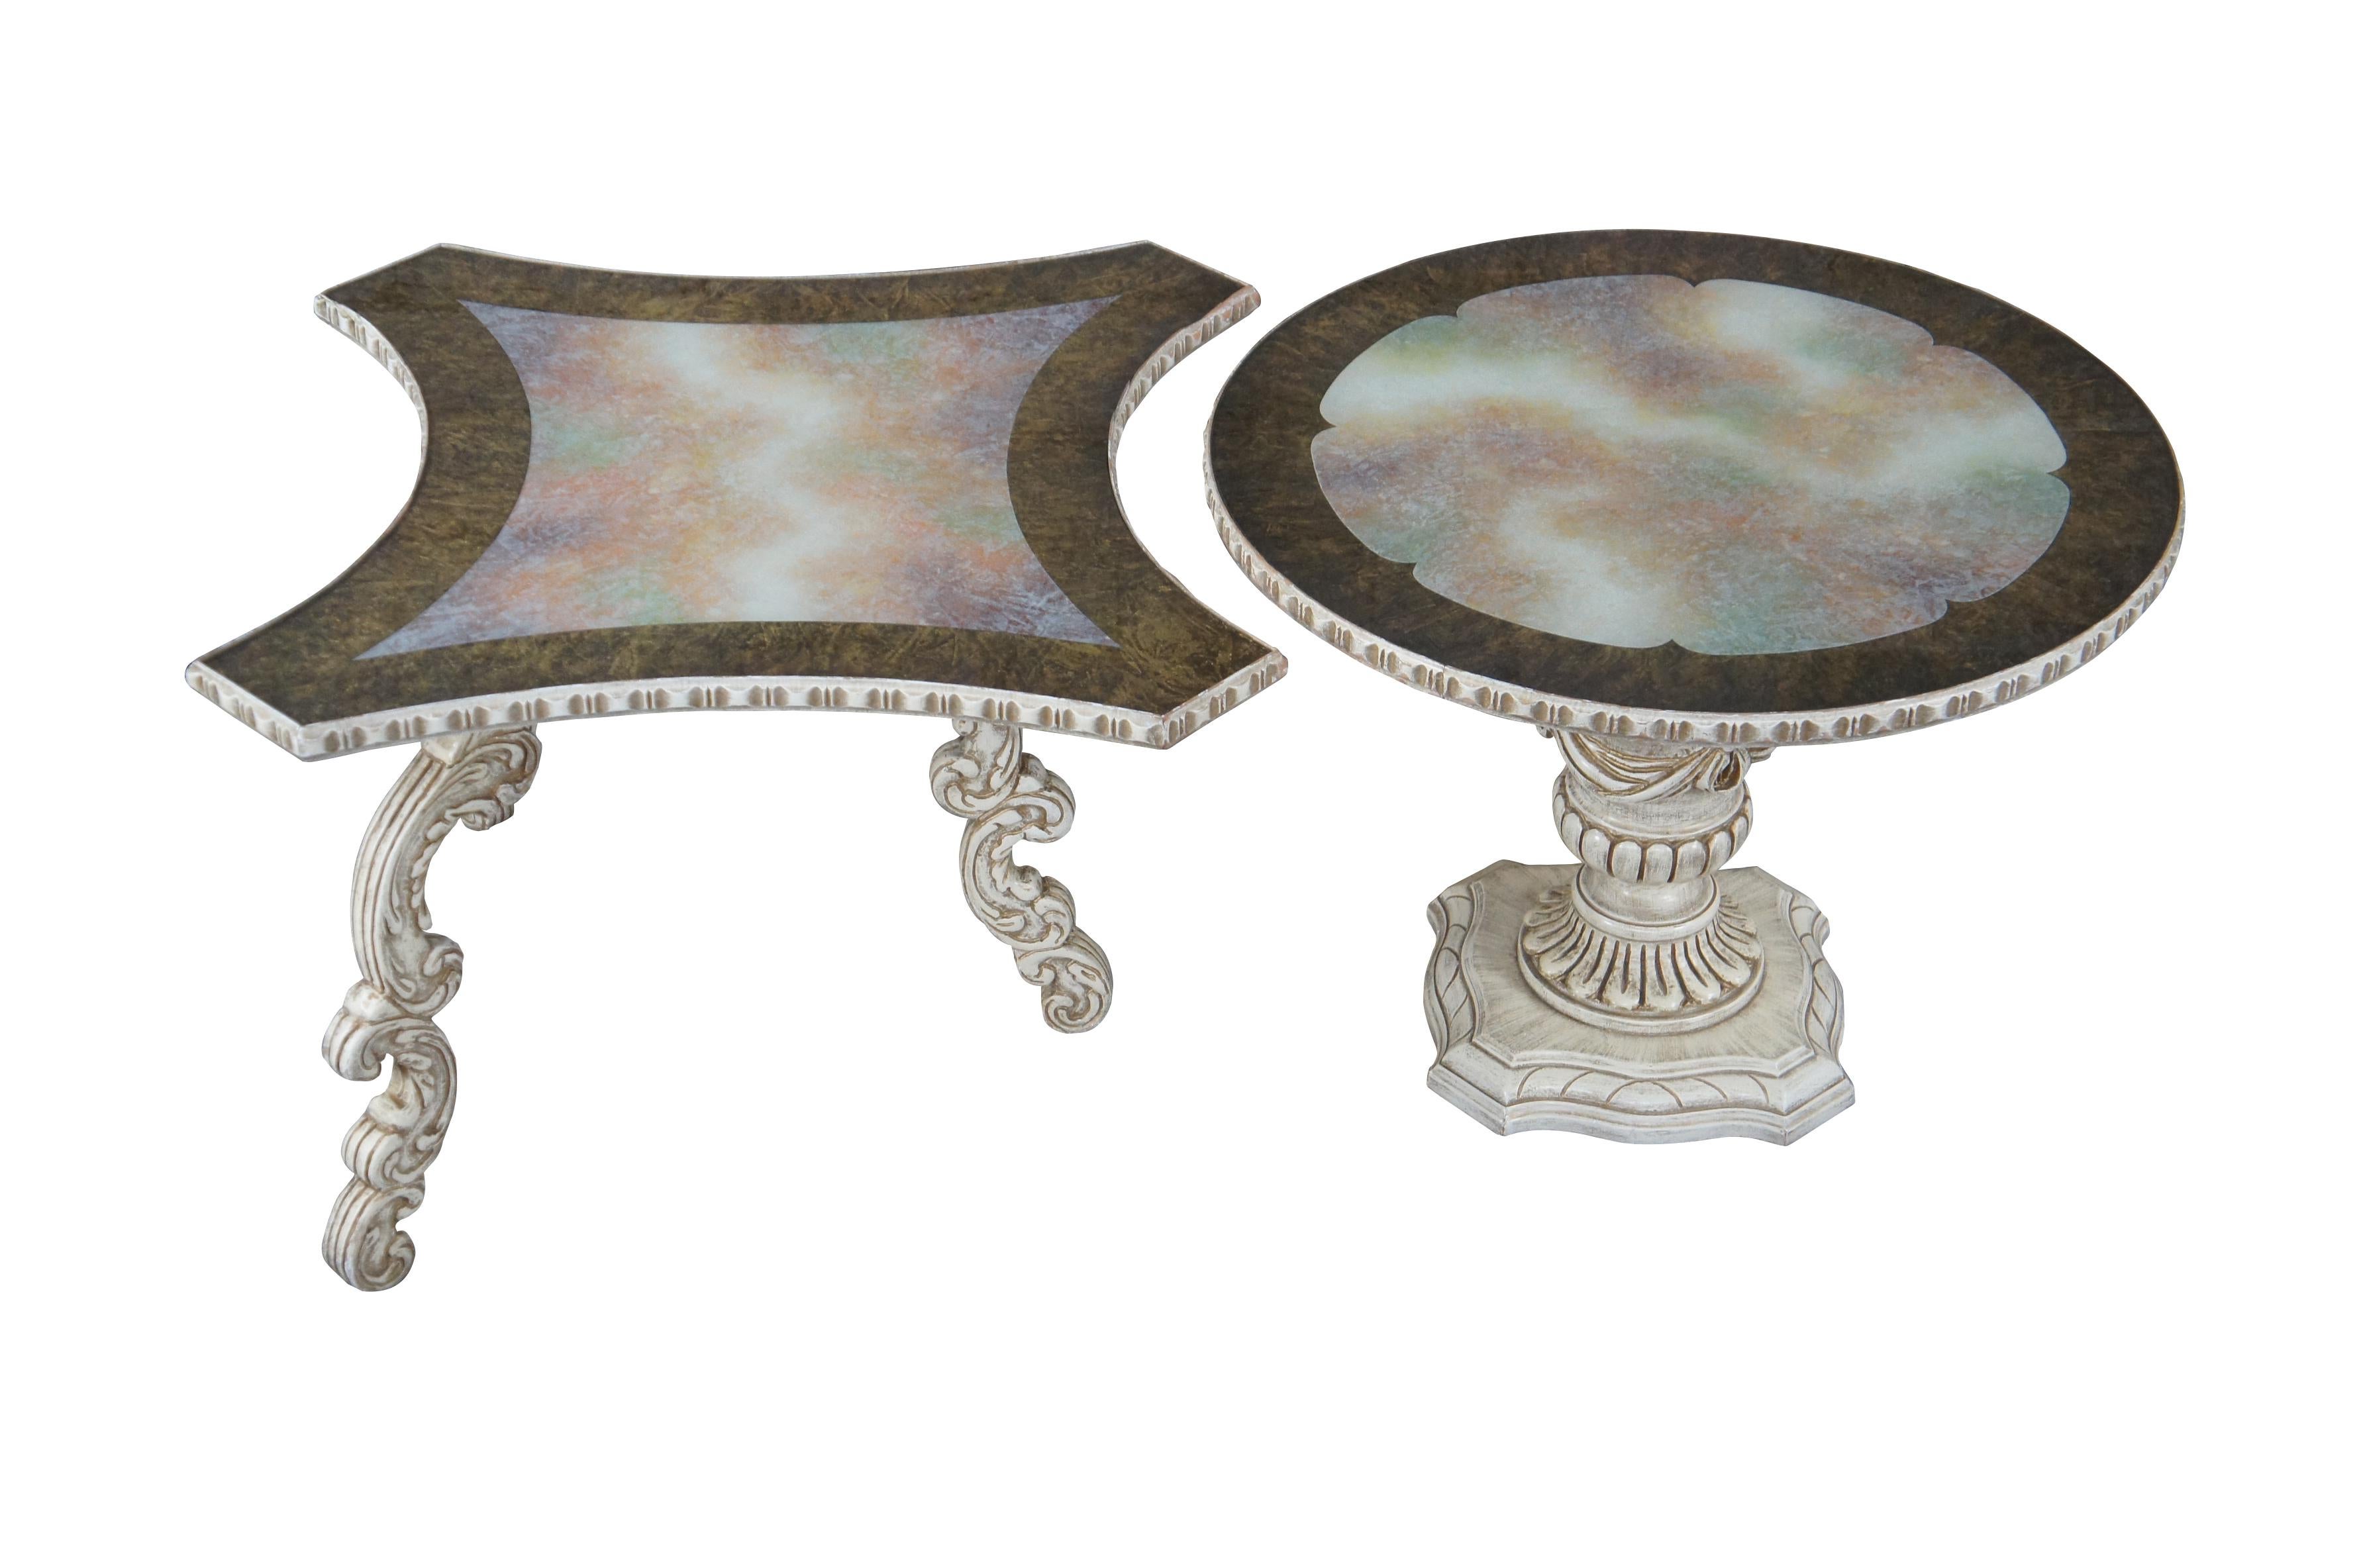 A fun set of provincial tables, circa 1970s. One is round with a pedestal base and the other has a contoured square form with three legs. Features glass inset tops with an iridescent rainbowed center framed in gold. Each has a carved leg or base and